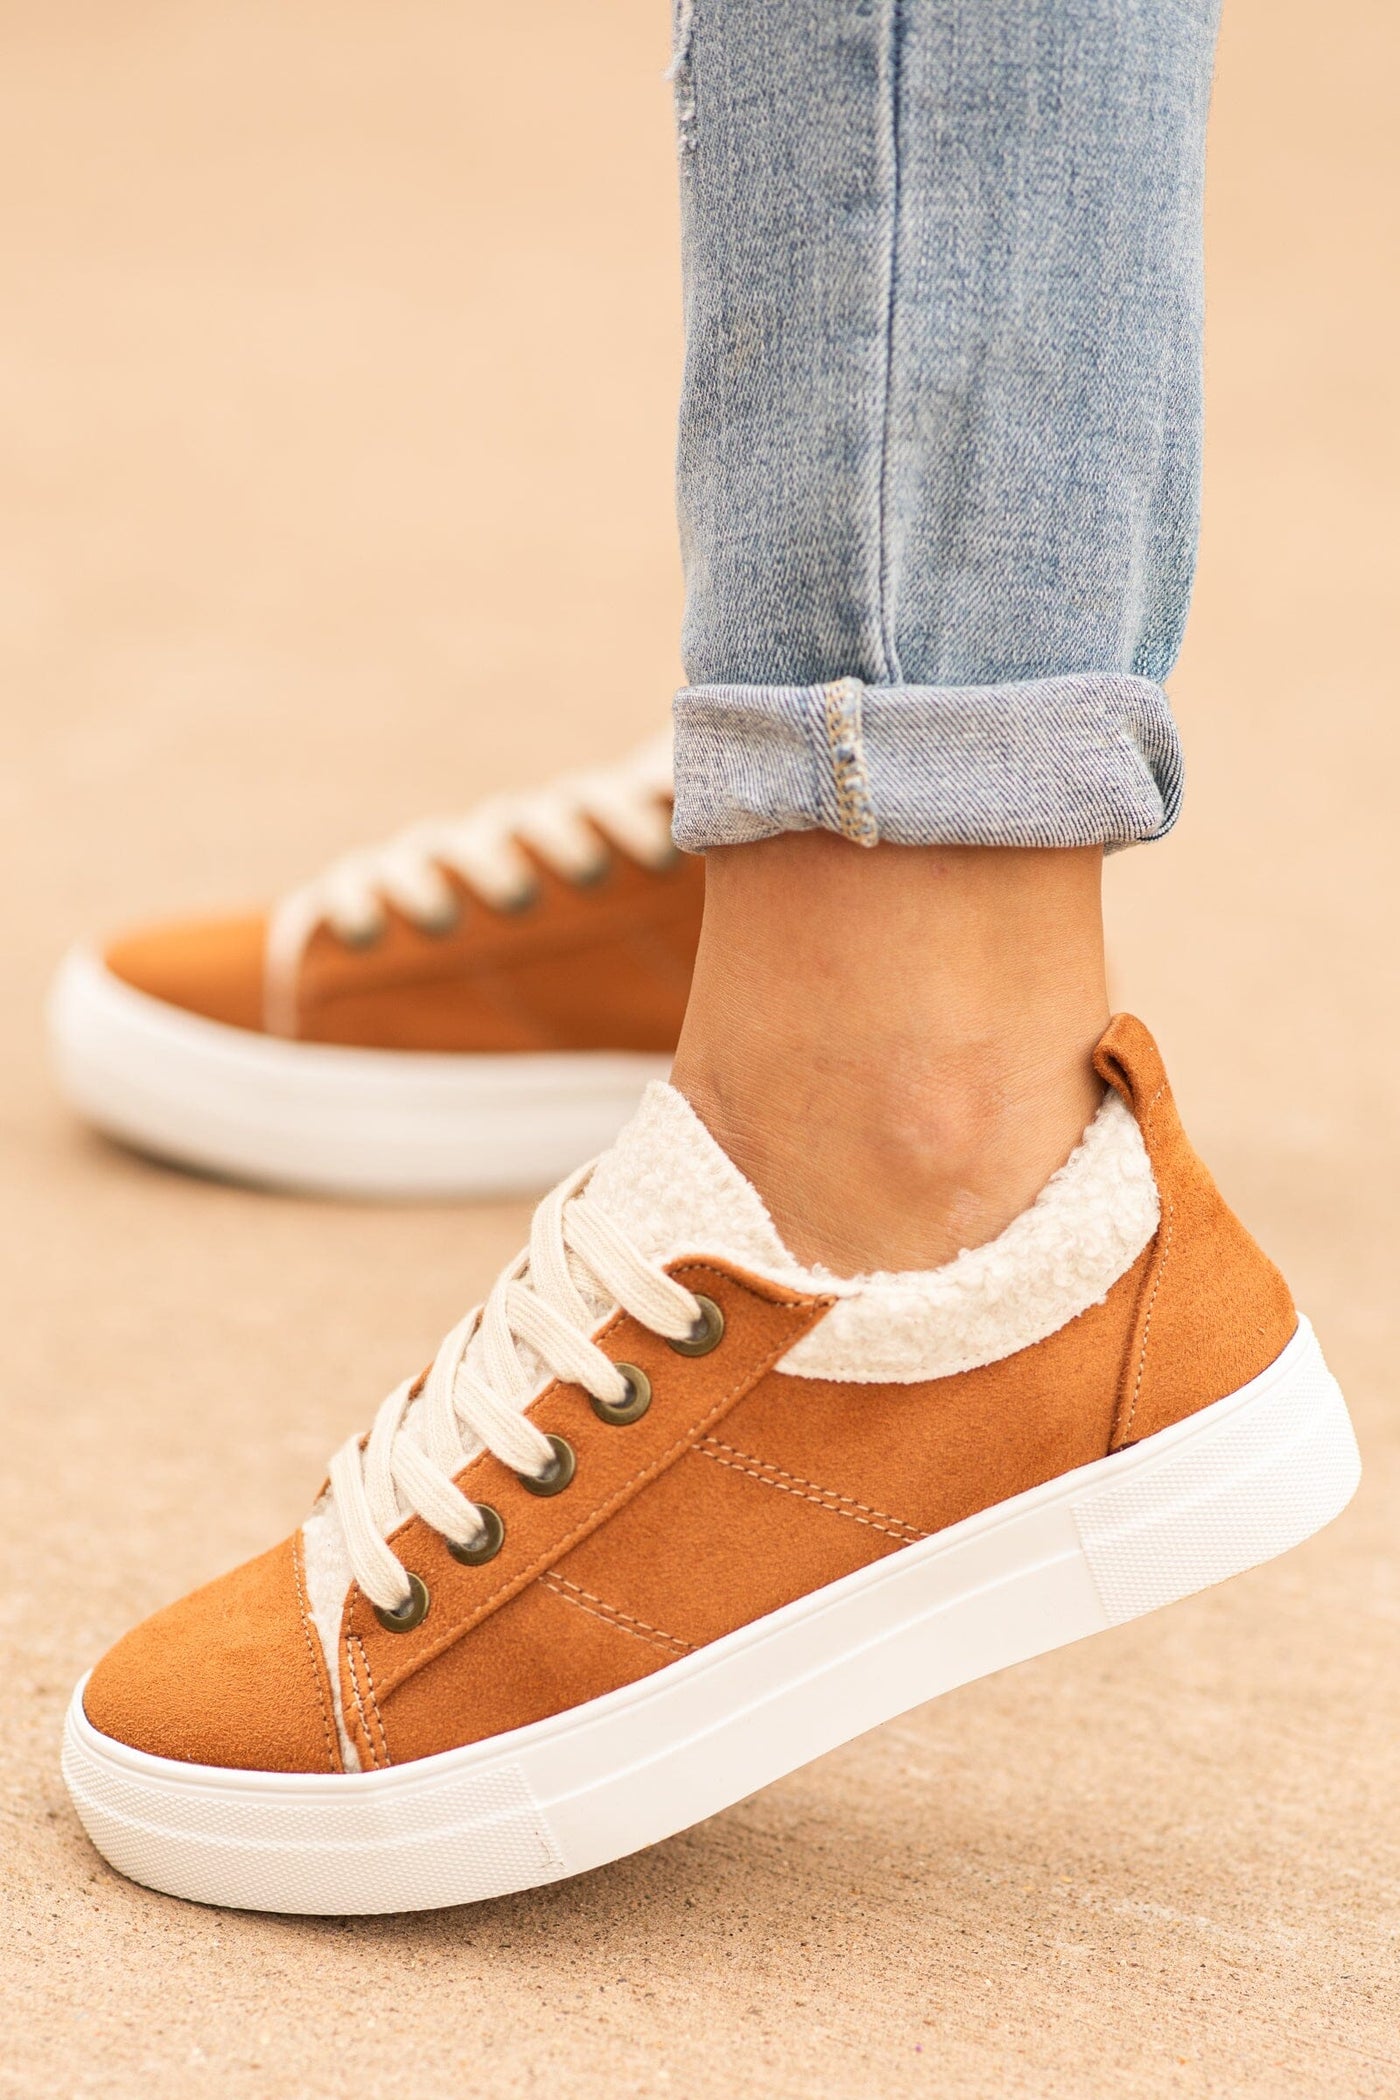 Women's Cinnamon and Beige Lace Up Sneakers | Size 5.5